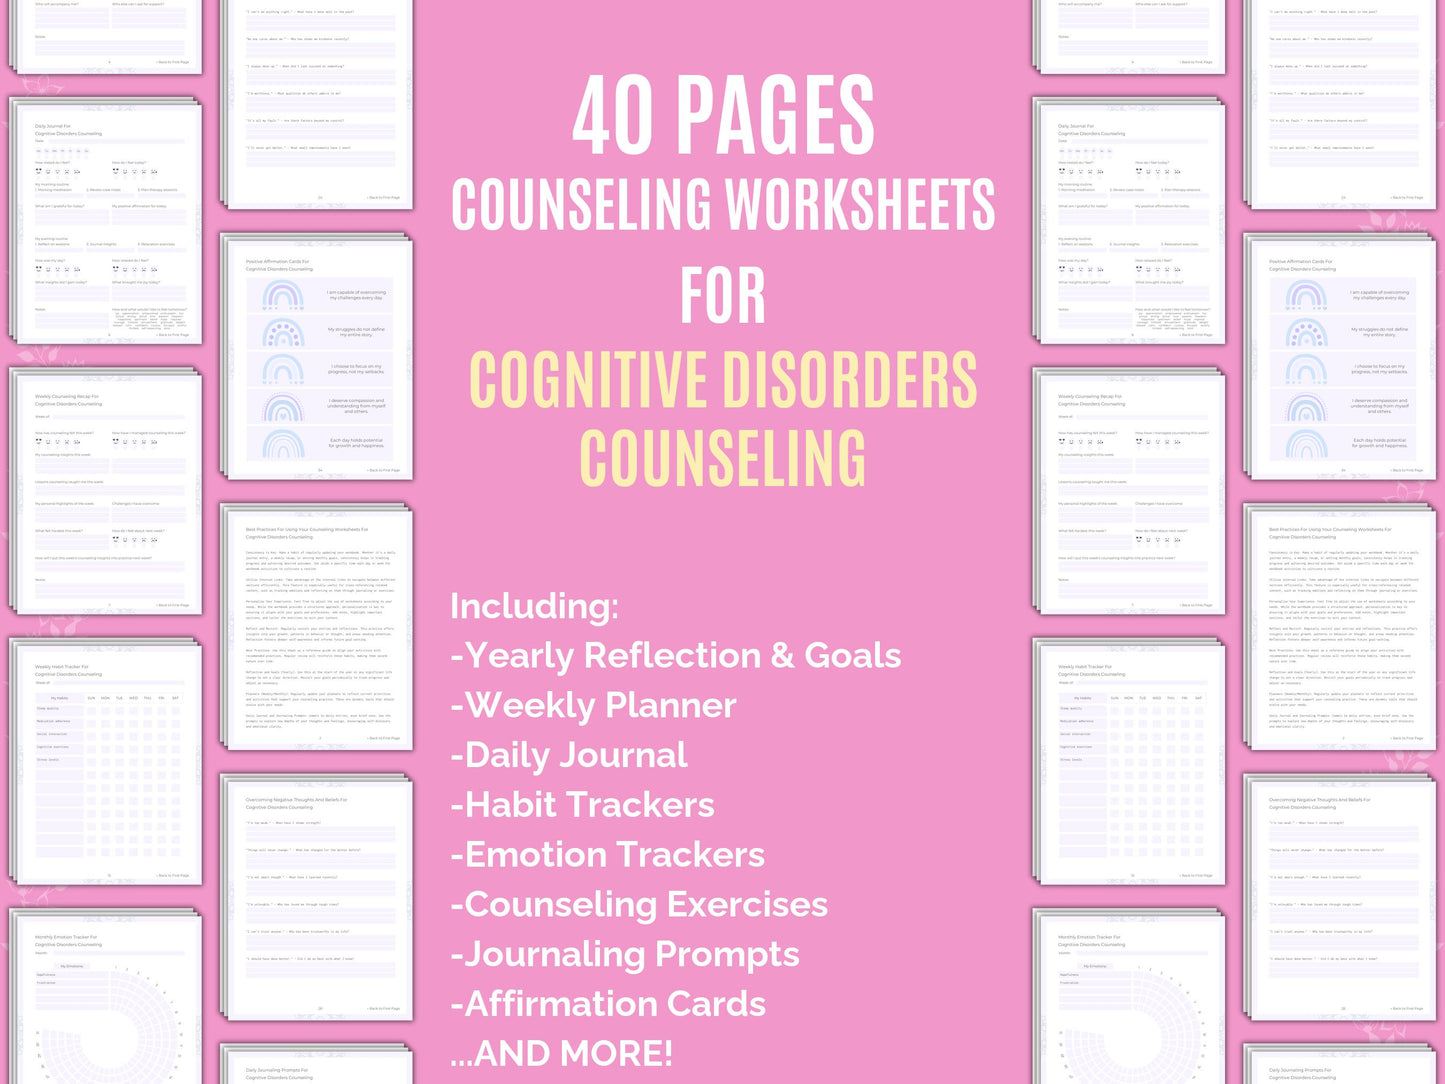 Cognitive Disorders Counseling